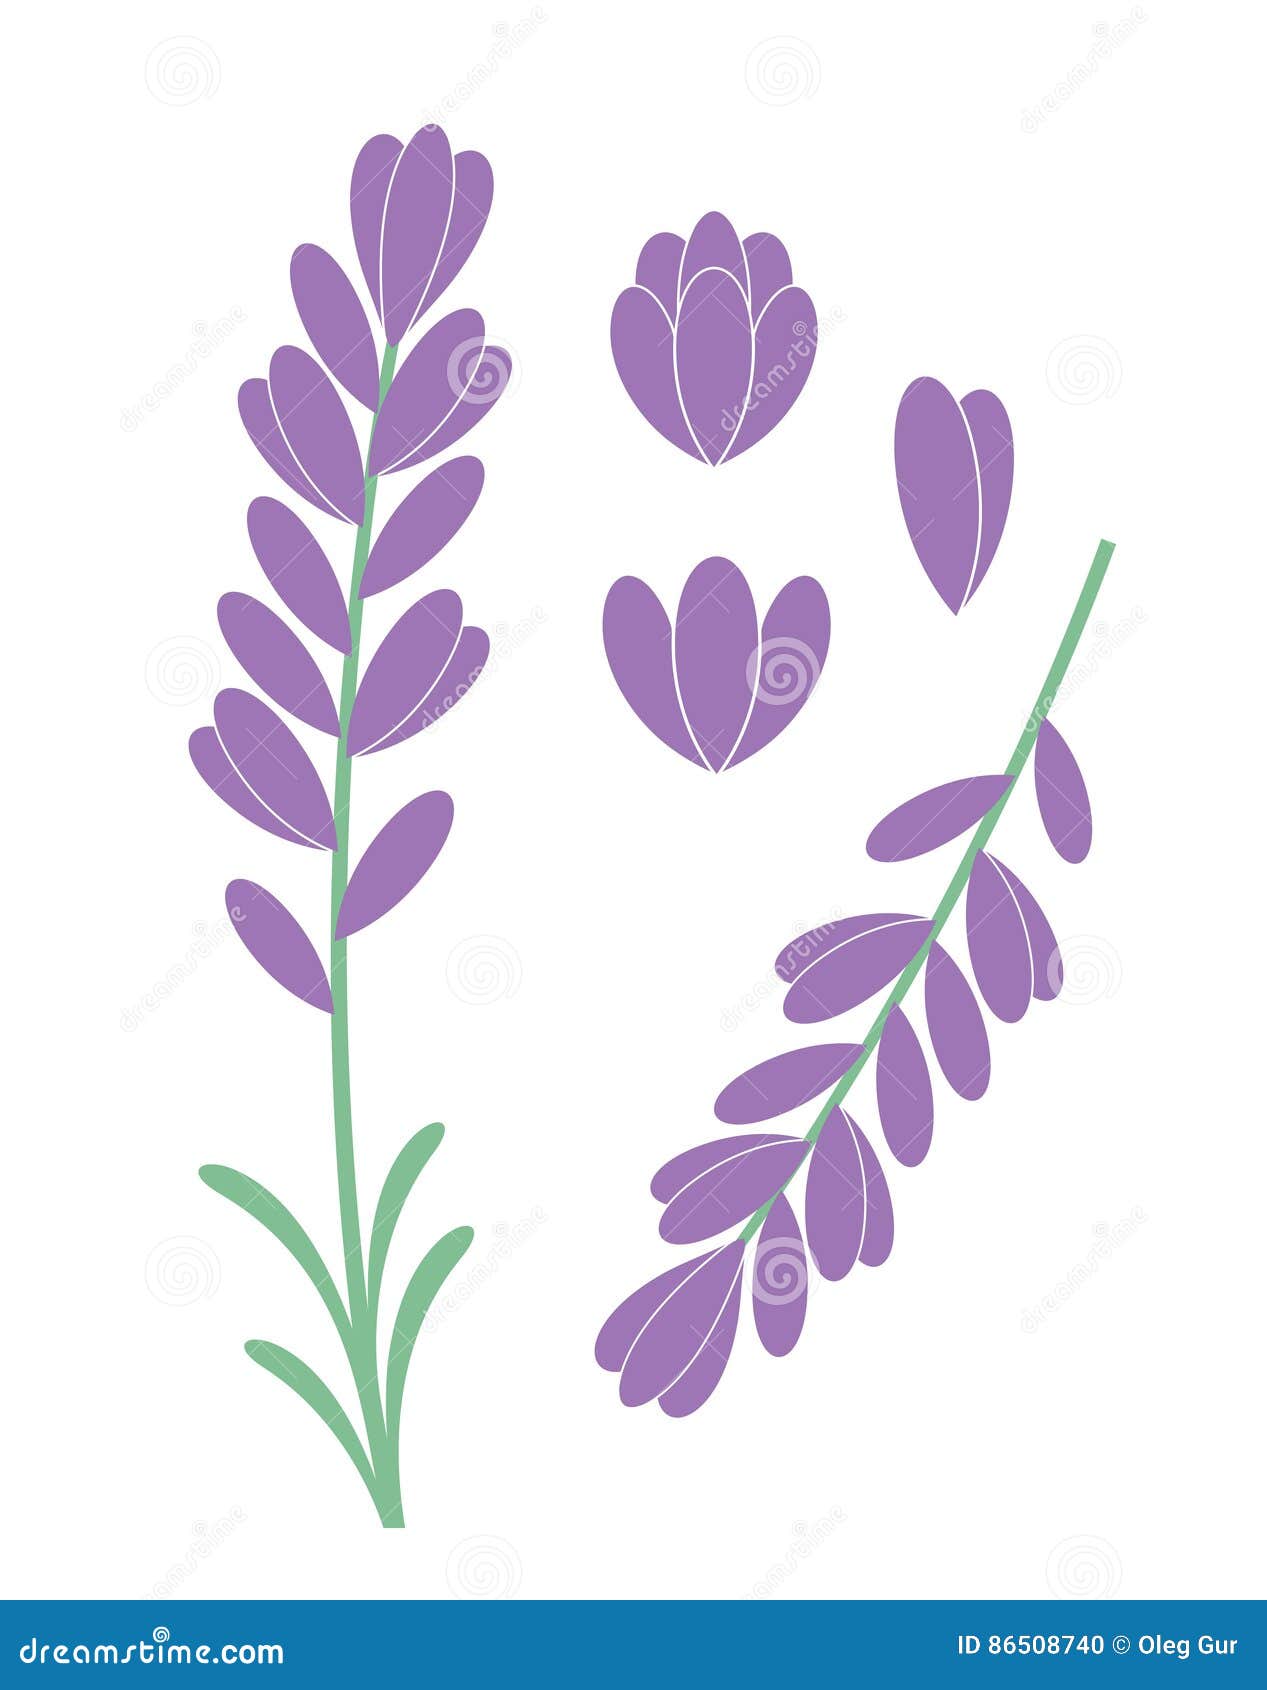 Lavender Set Isolated On White Vector Hand Drawn Illustration Provance ...